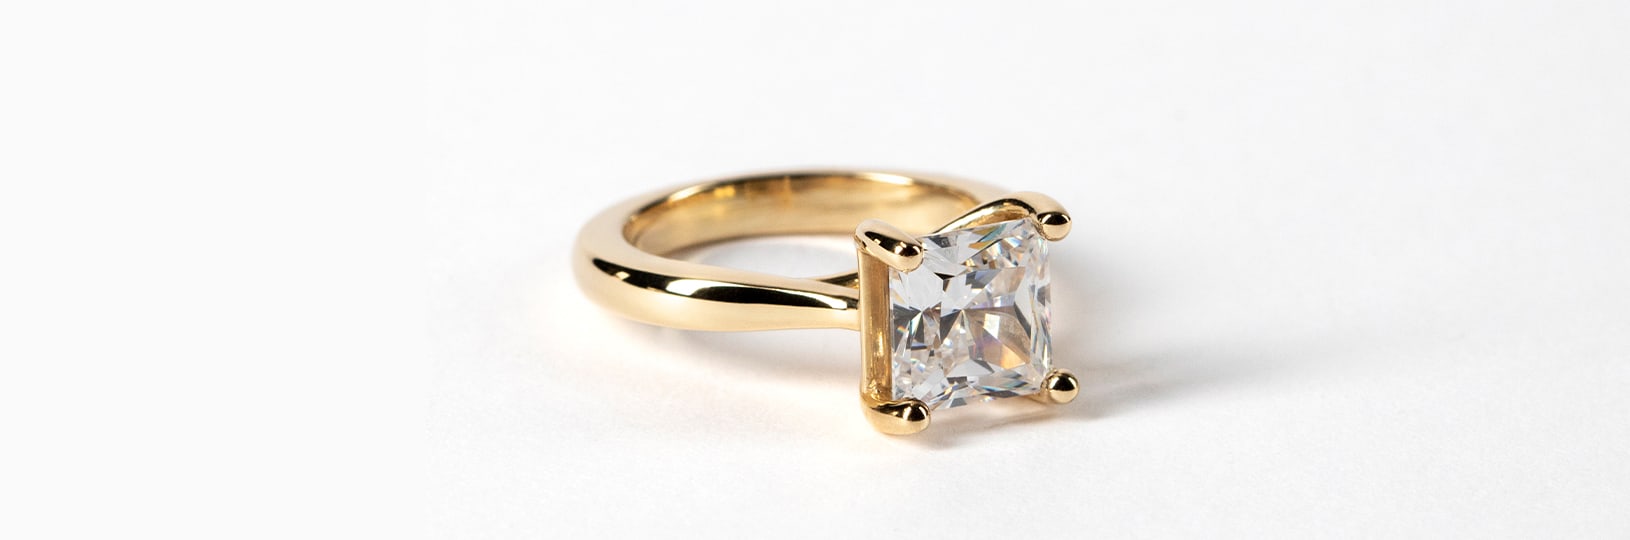 A yellow gold engagement ring